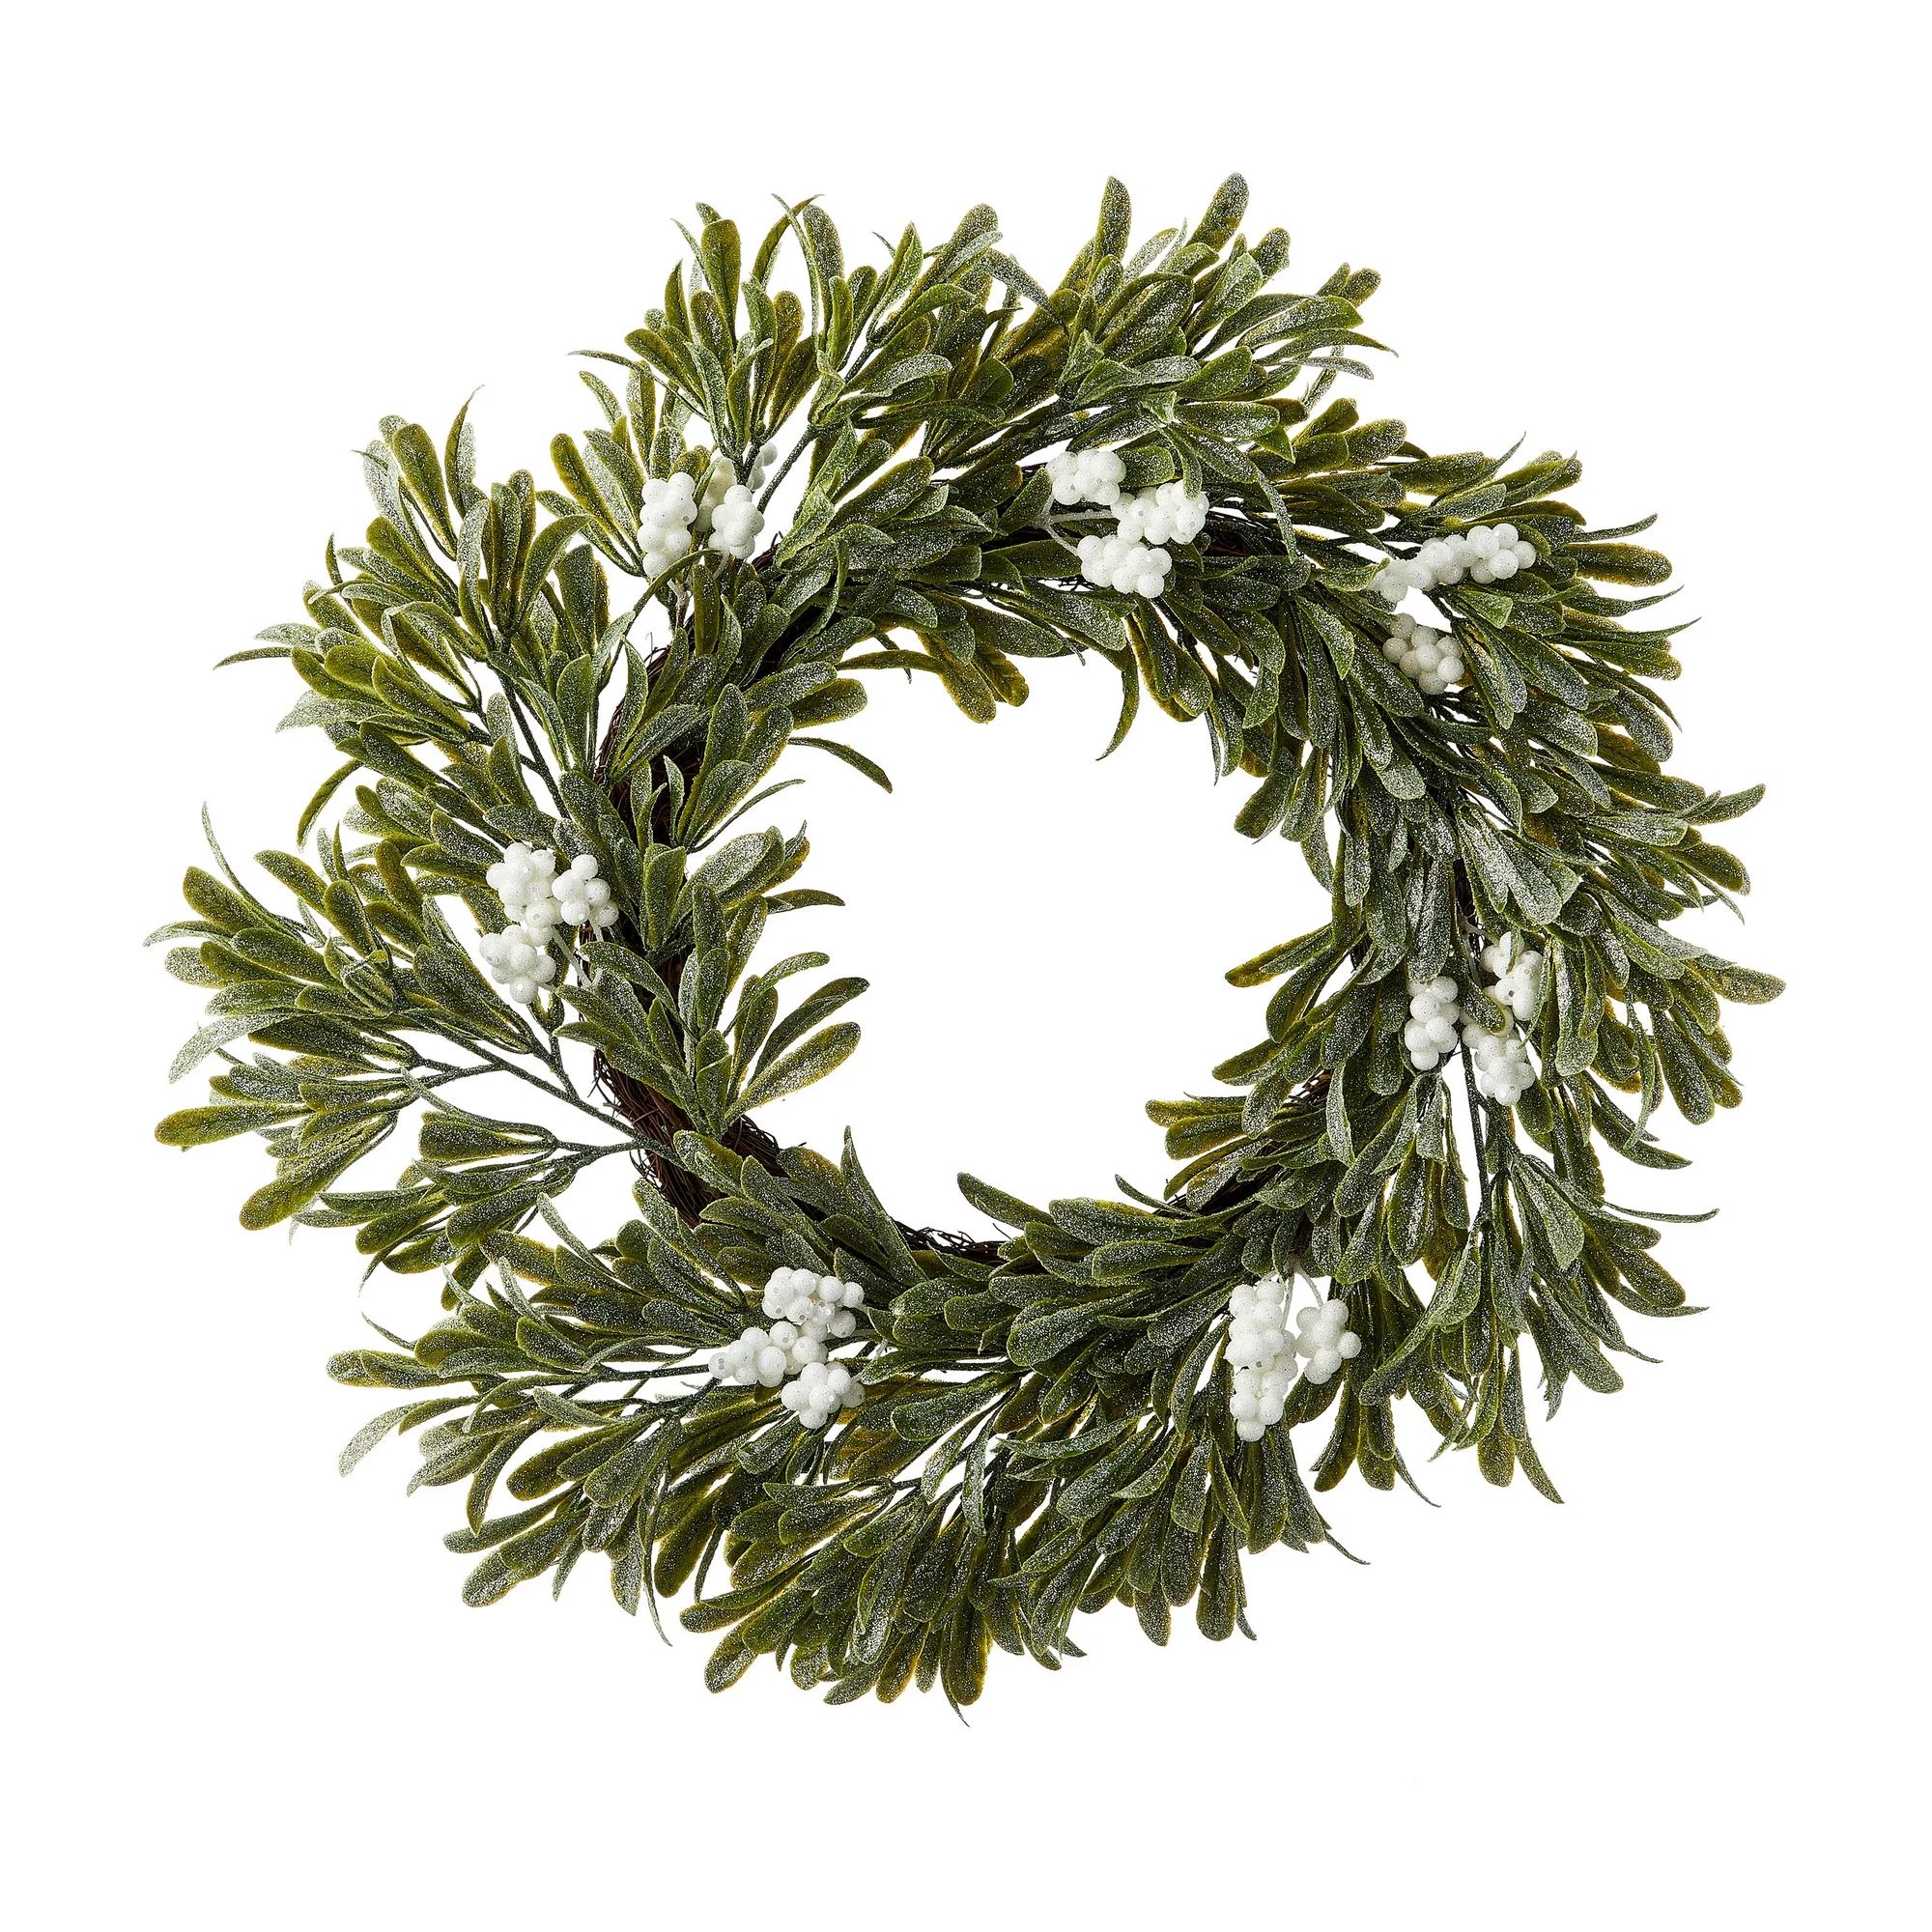 White Berry Greenery Un-Lit Christmas Wreath, 24 in height 24 in length, by Holiday Time | Walmart (US)